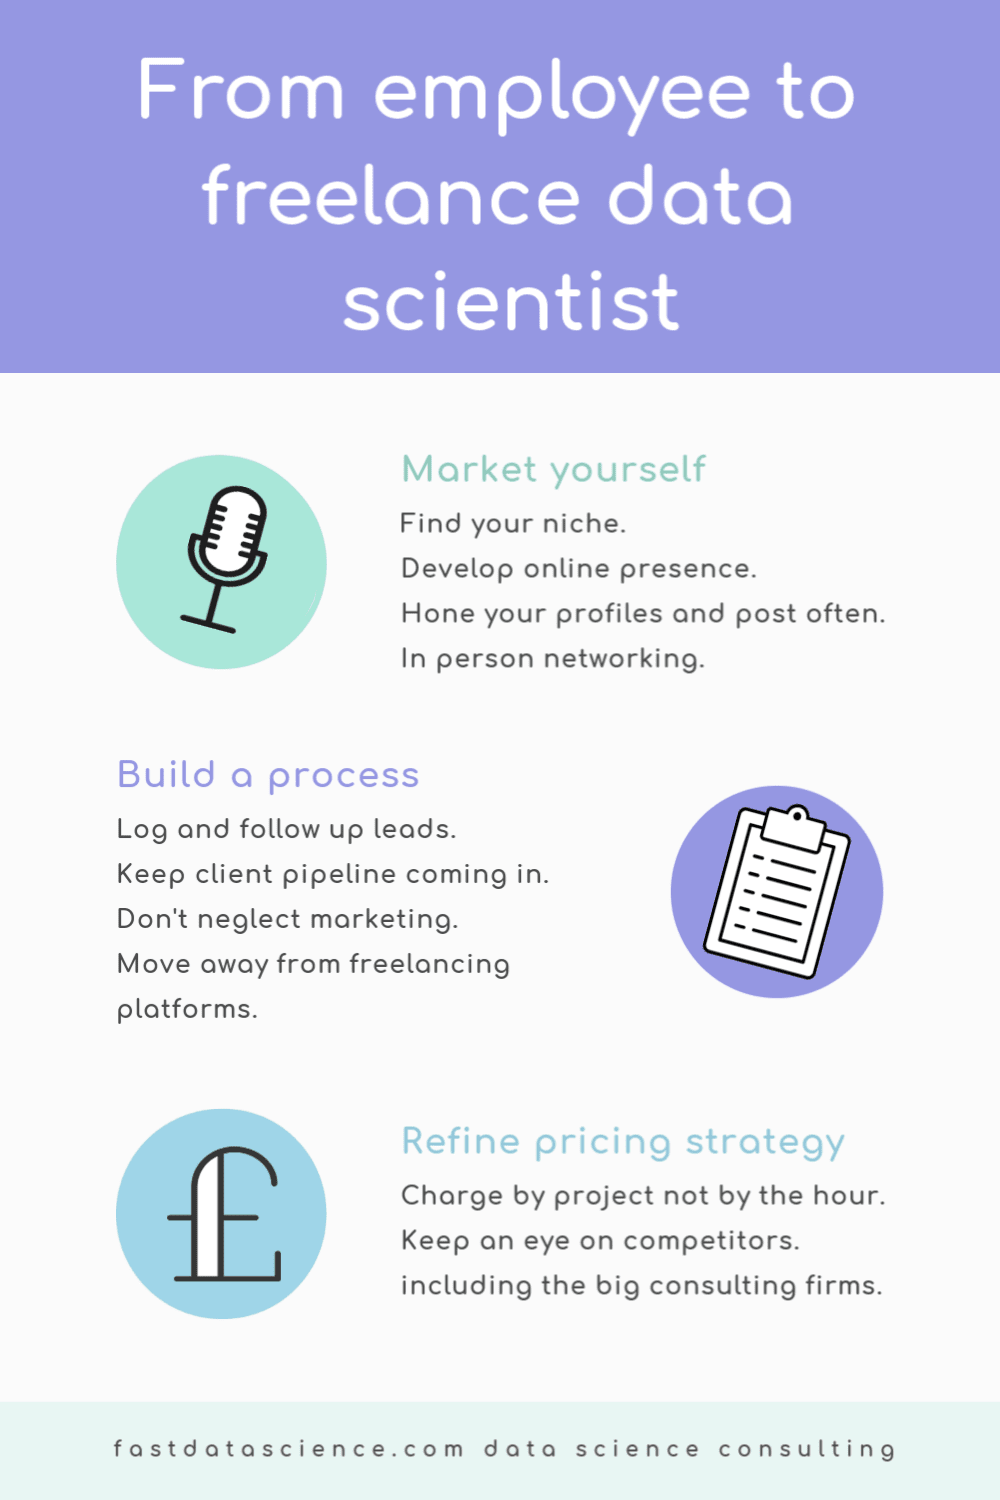 How to go from employee to freelance data scientist. Three stages: market yourself, build a process, and refine your pricing strategy